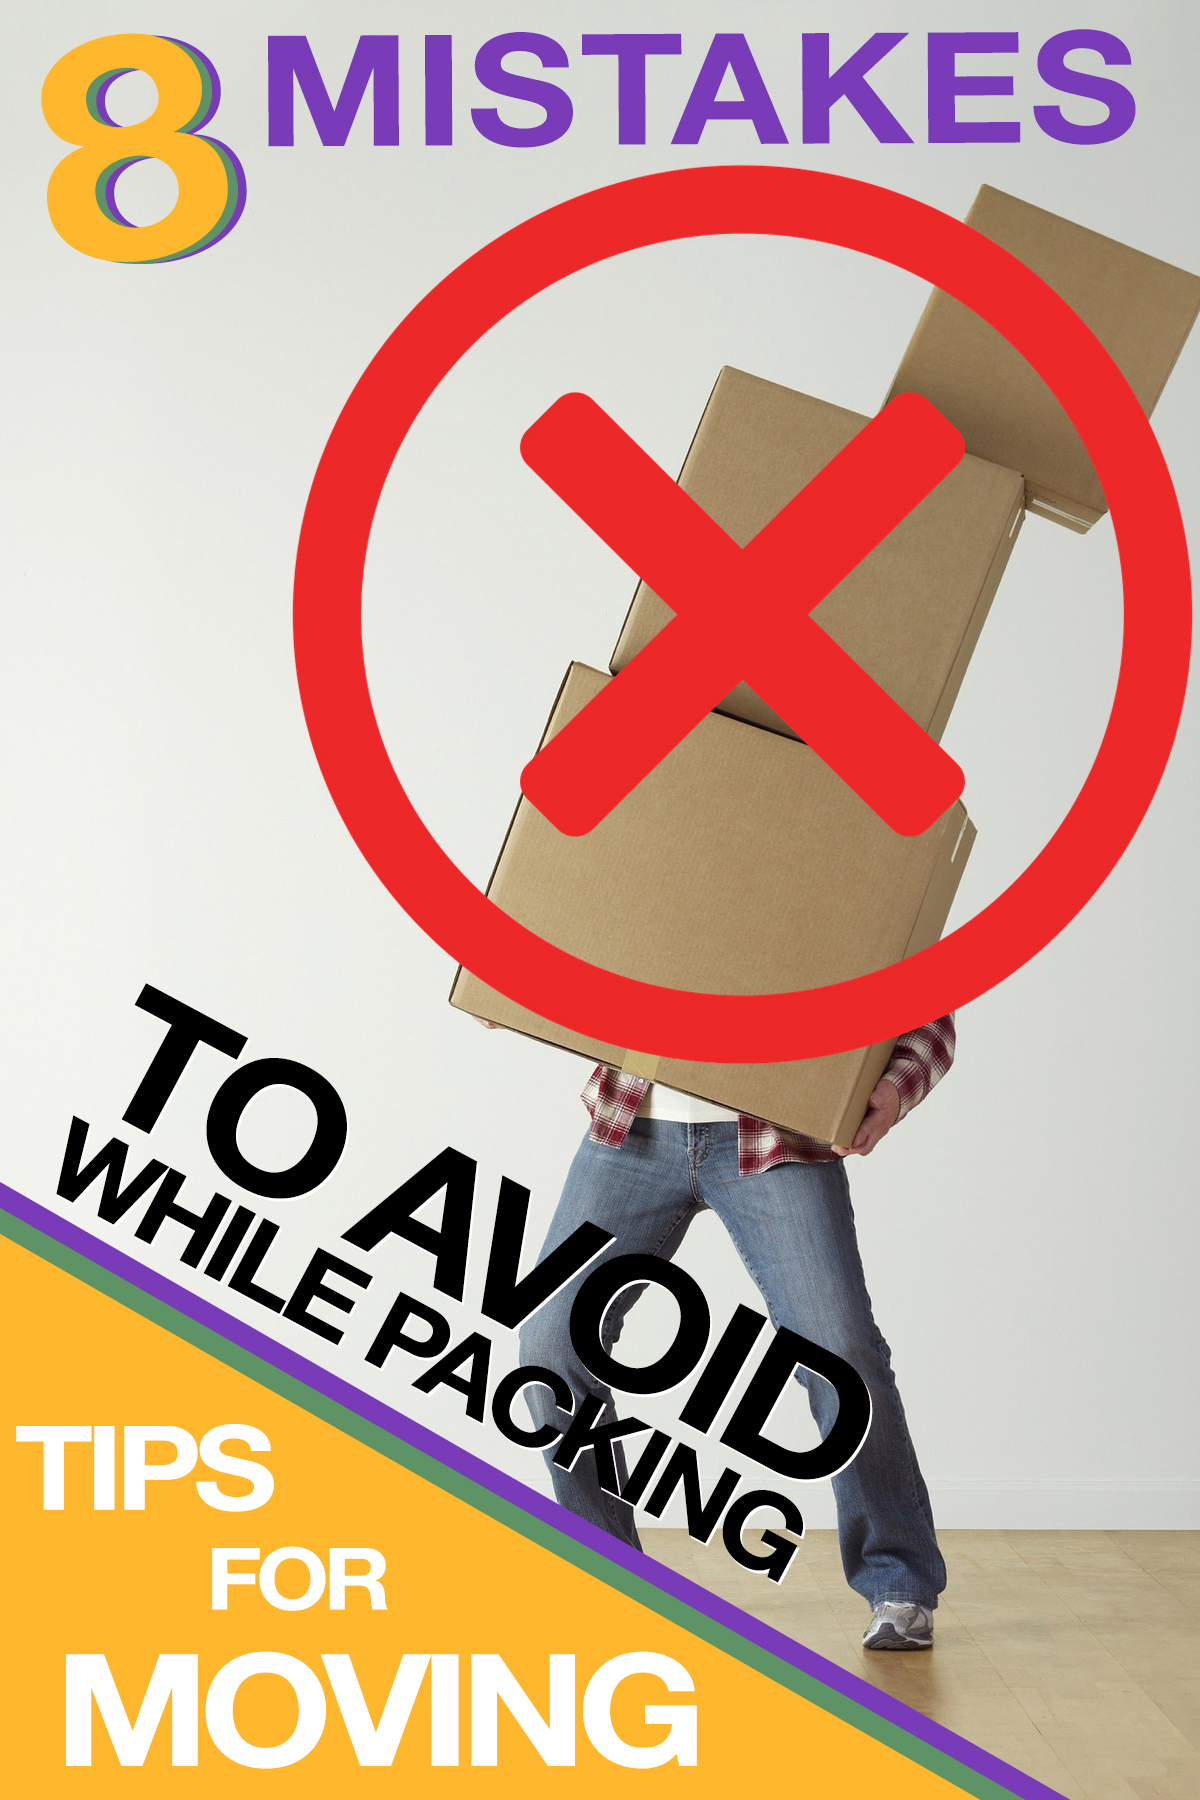 8_Critical_Mistakes_To_Avoid_While_Packing_2 copy